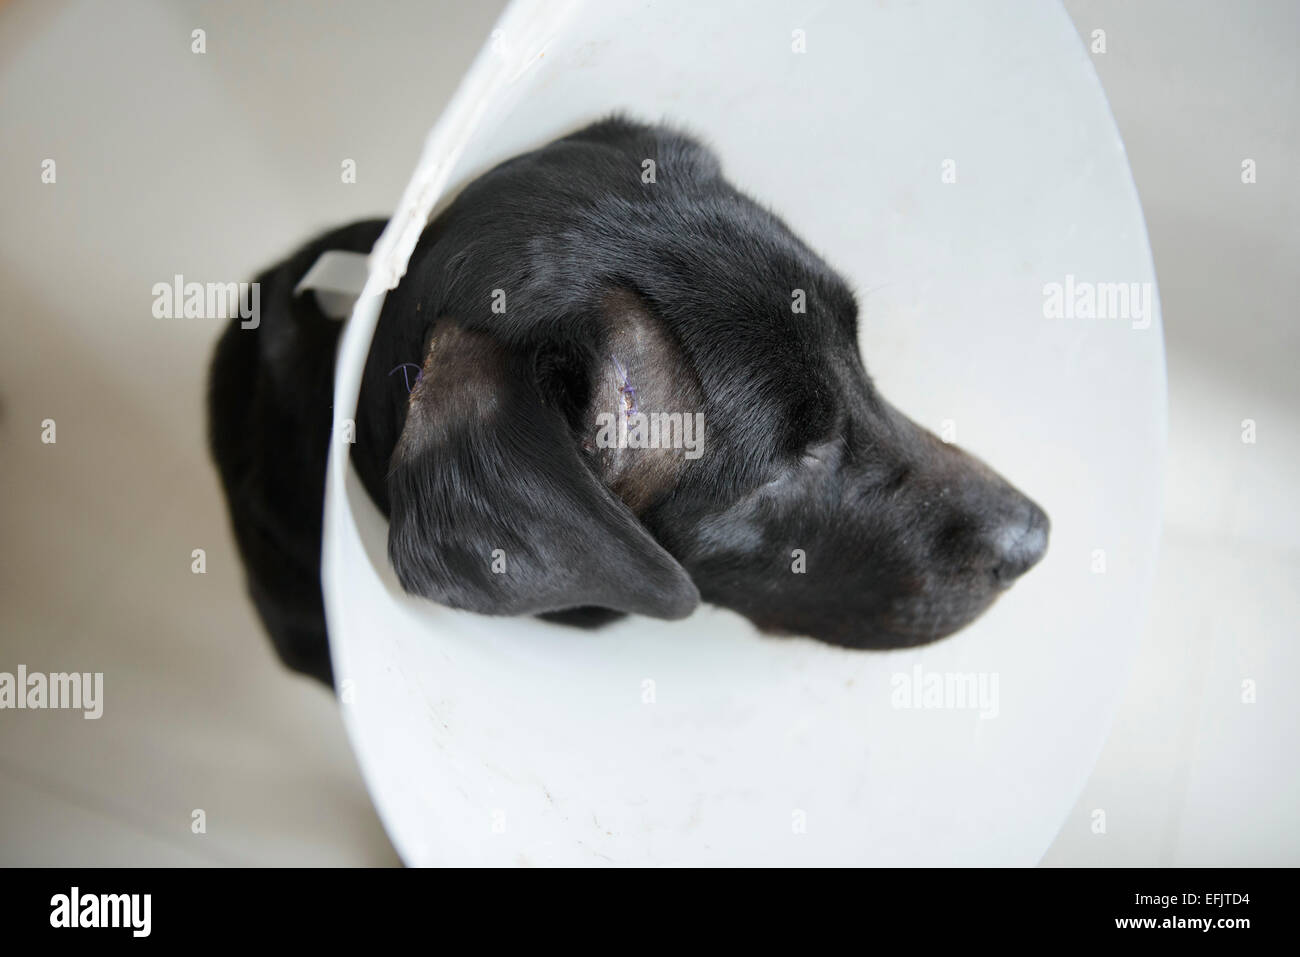 Injured black Labrador Retriever wearing a dog cone to protect stiches Stock Photo